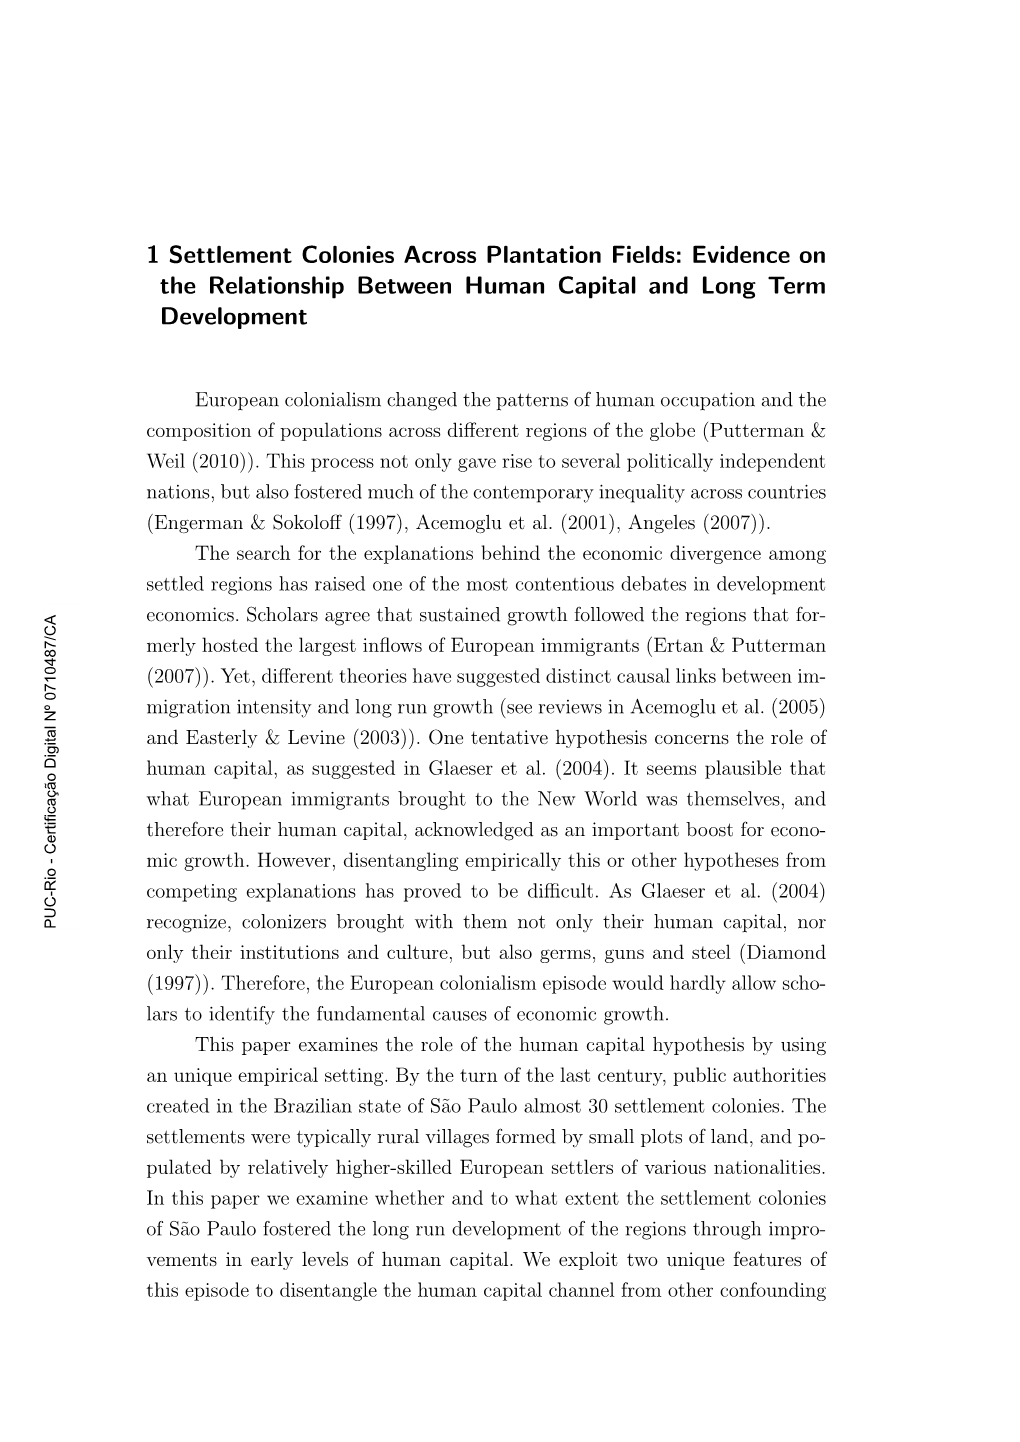 1 Settlement Colonies Across Plantation Fields: Evidence on the Relationship Between Human Capital and Long Term Development